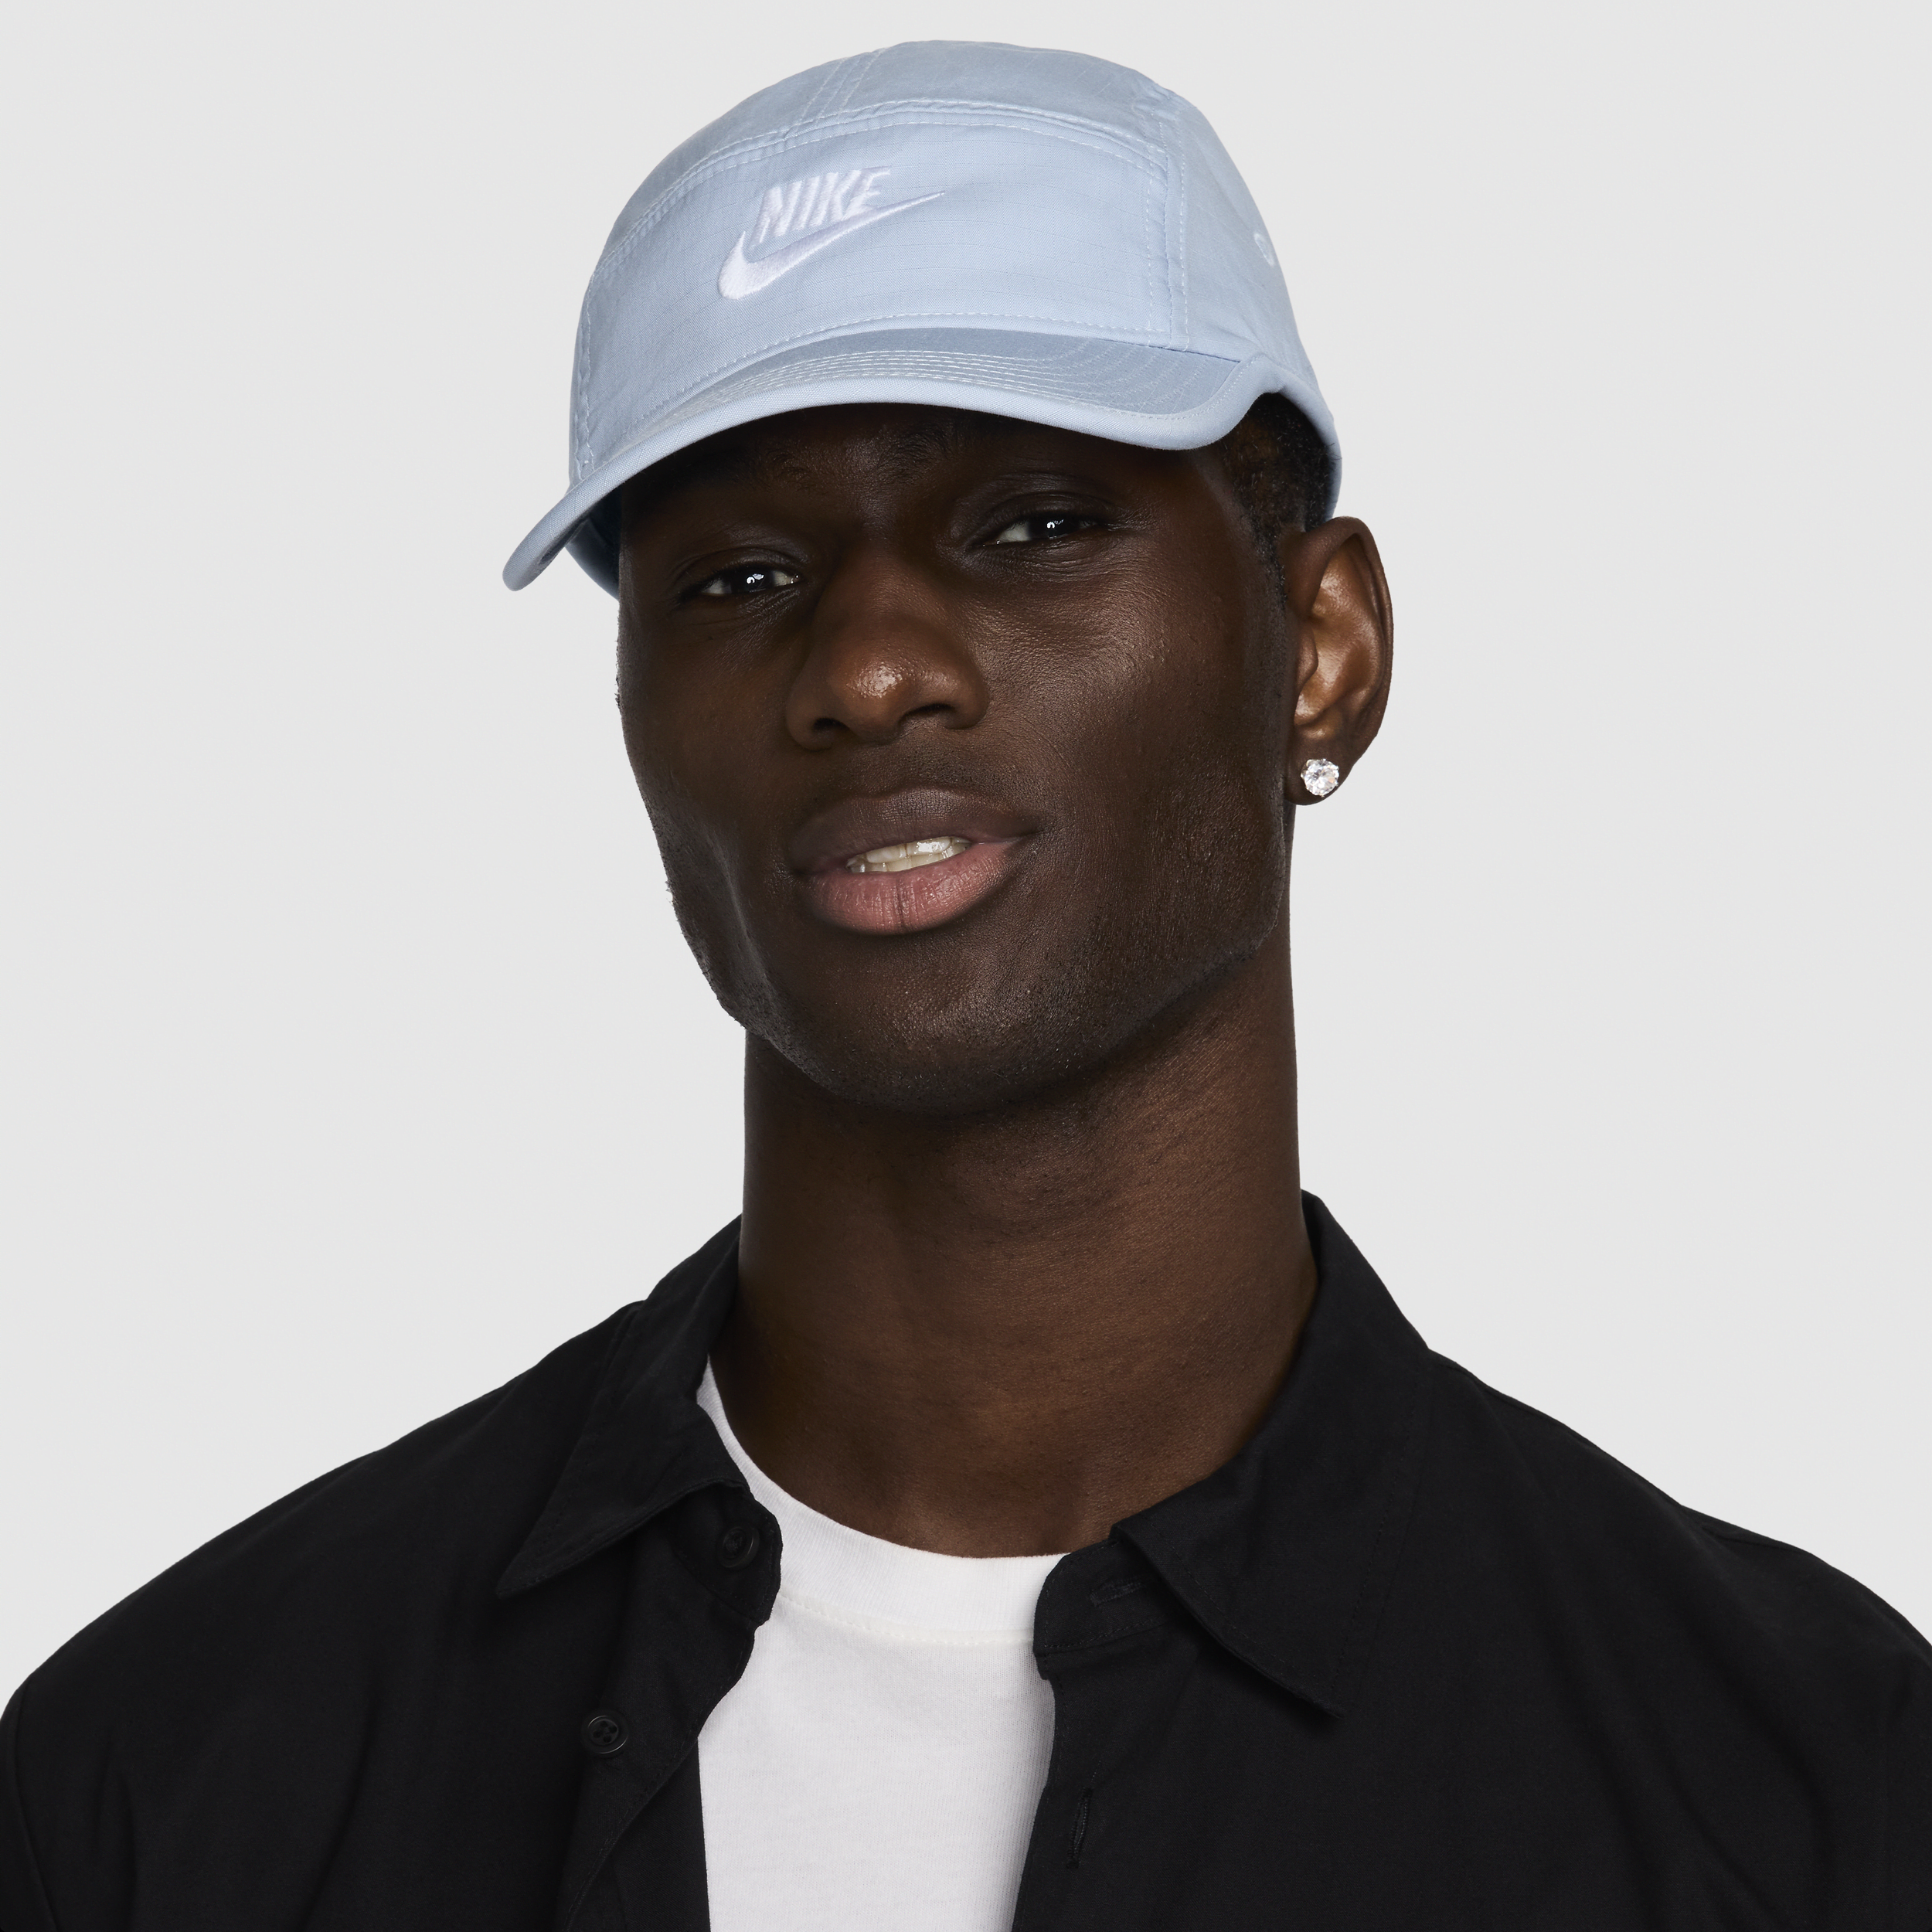 Nike Unisex Fly Unstructured Futura Cap In Blue